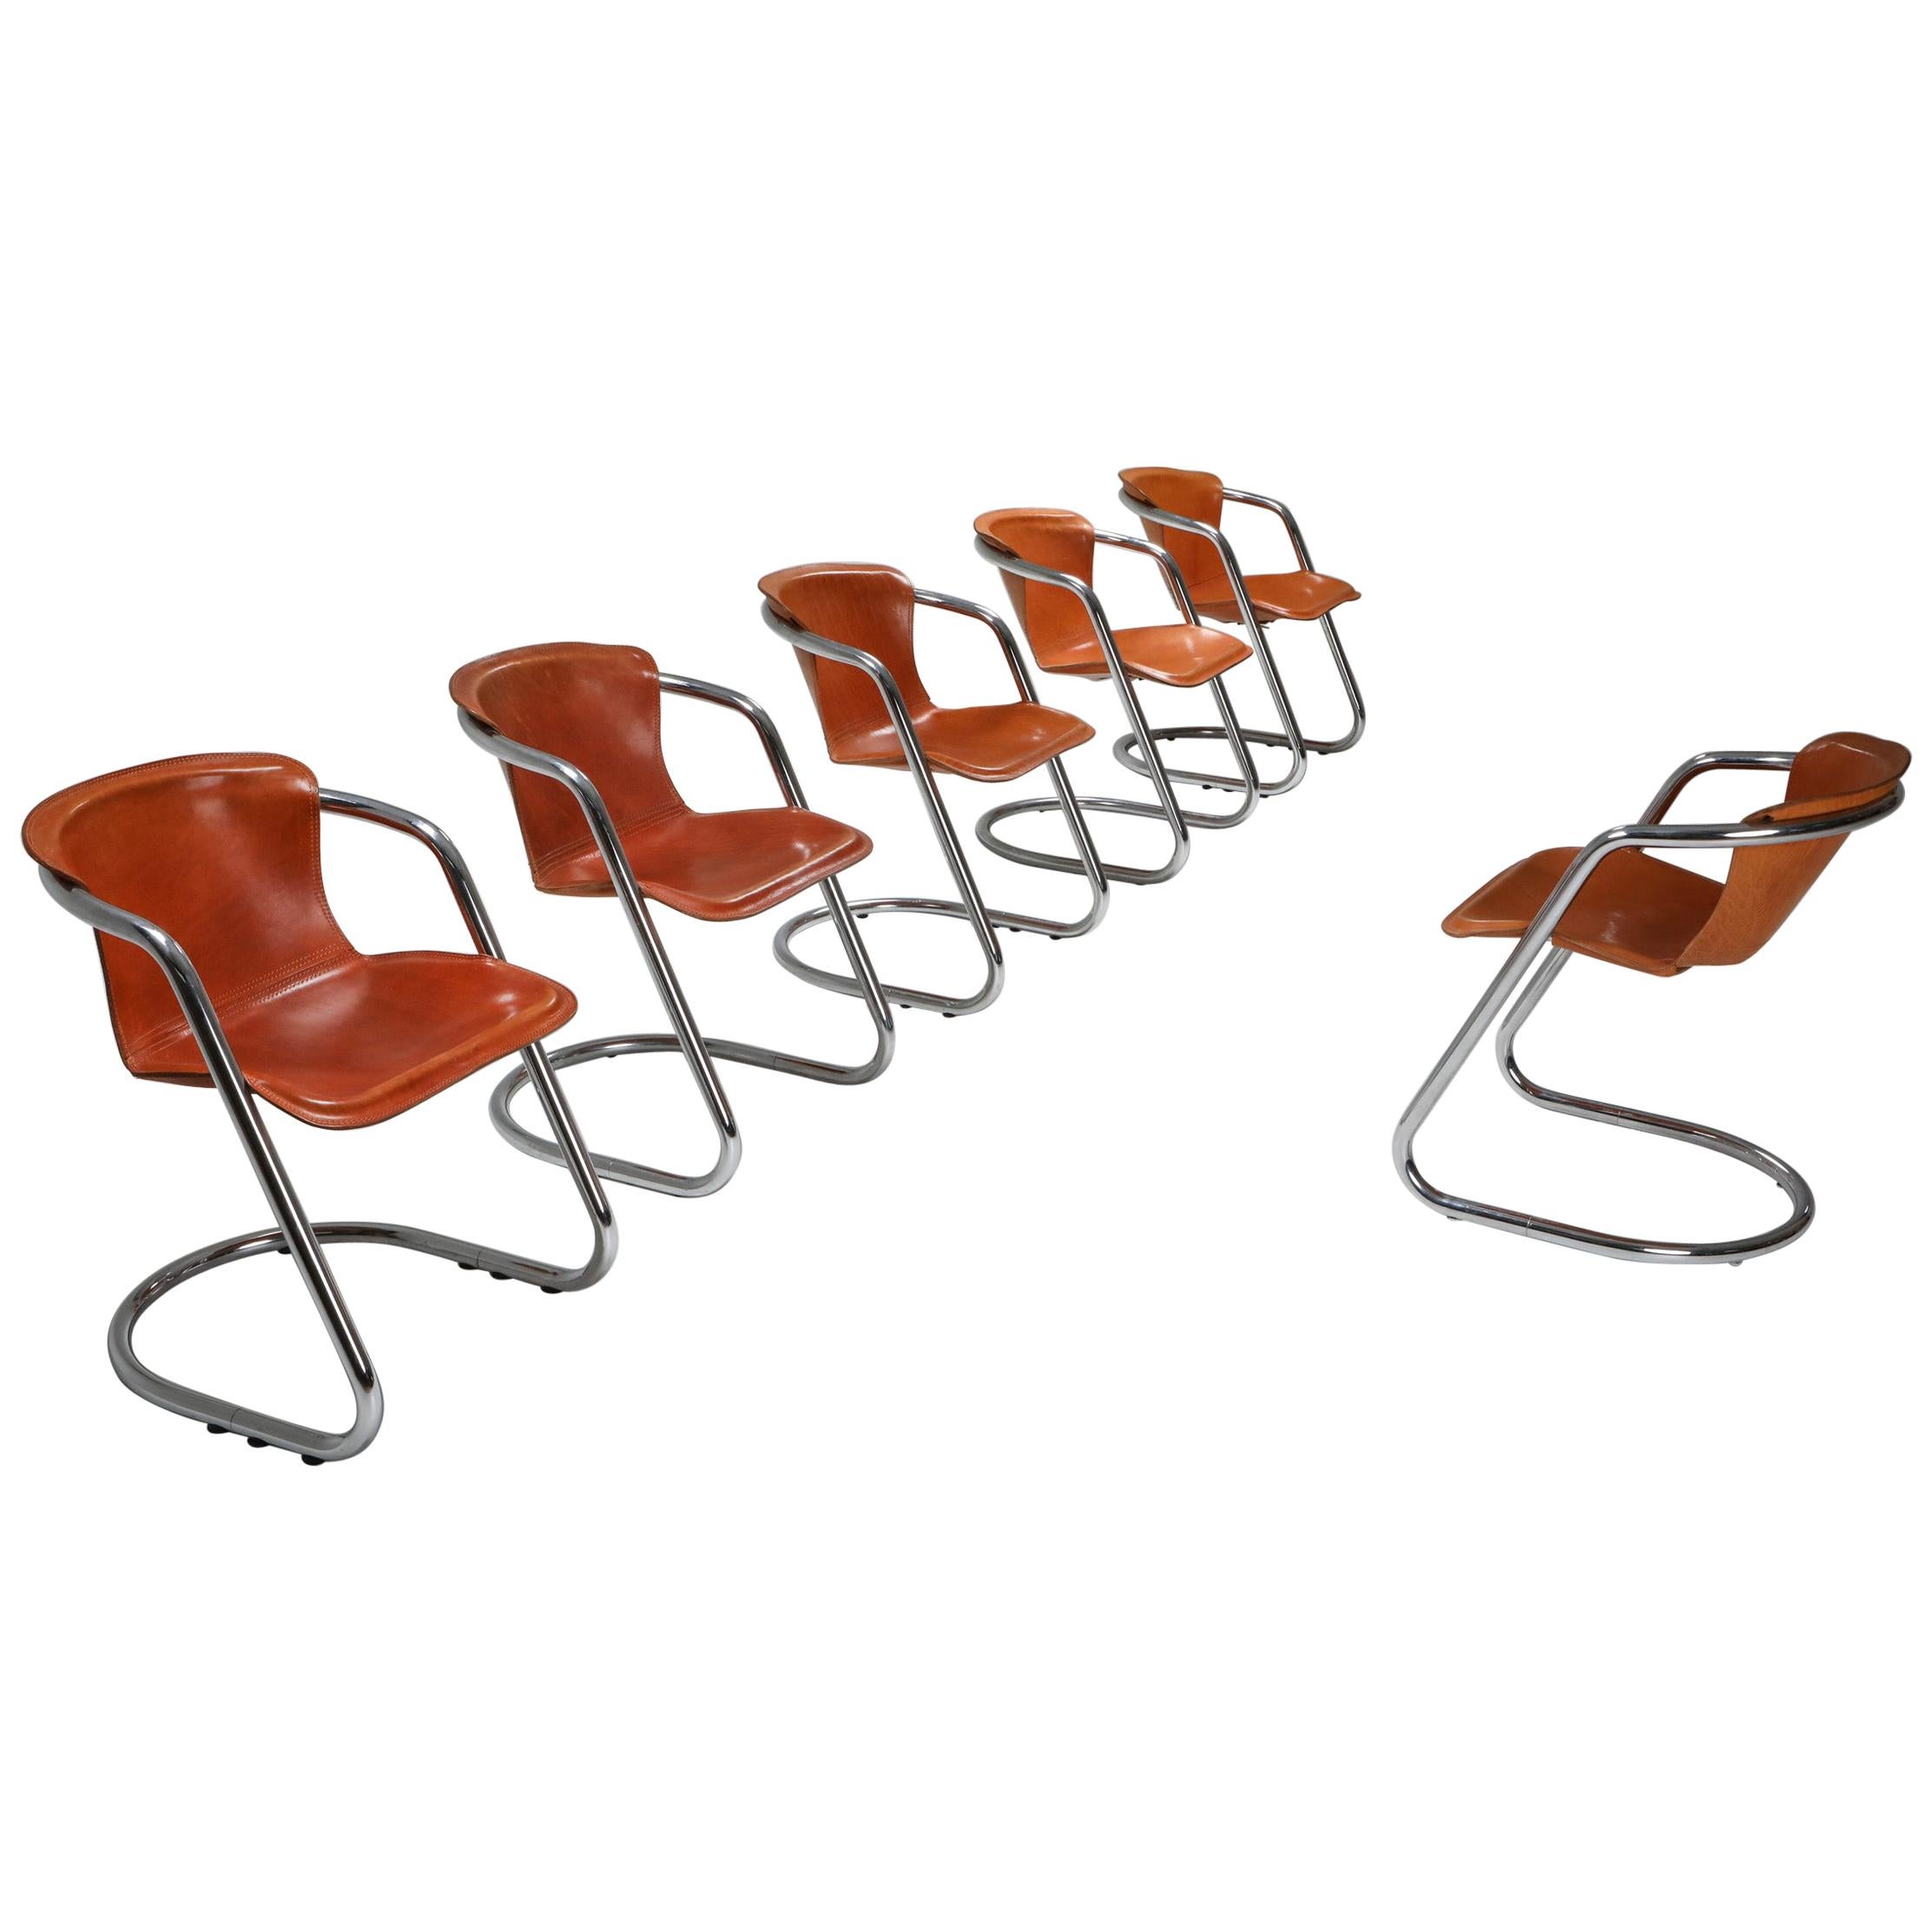 Willy Rizzo, Cidue, Italy, the 1970s, Cognac saddle leather dining chairs, superb set of armchairs by Willy Rizzo, a famous fashion photographer who became a furniture designer best known for its Italian glam style.
The tubular chrome frame and